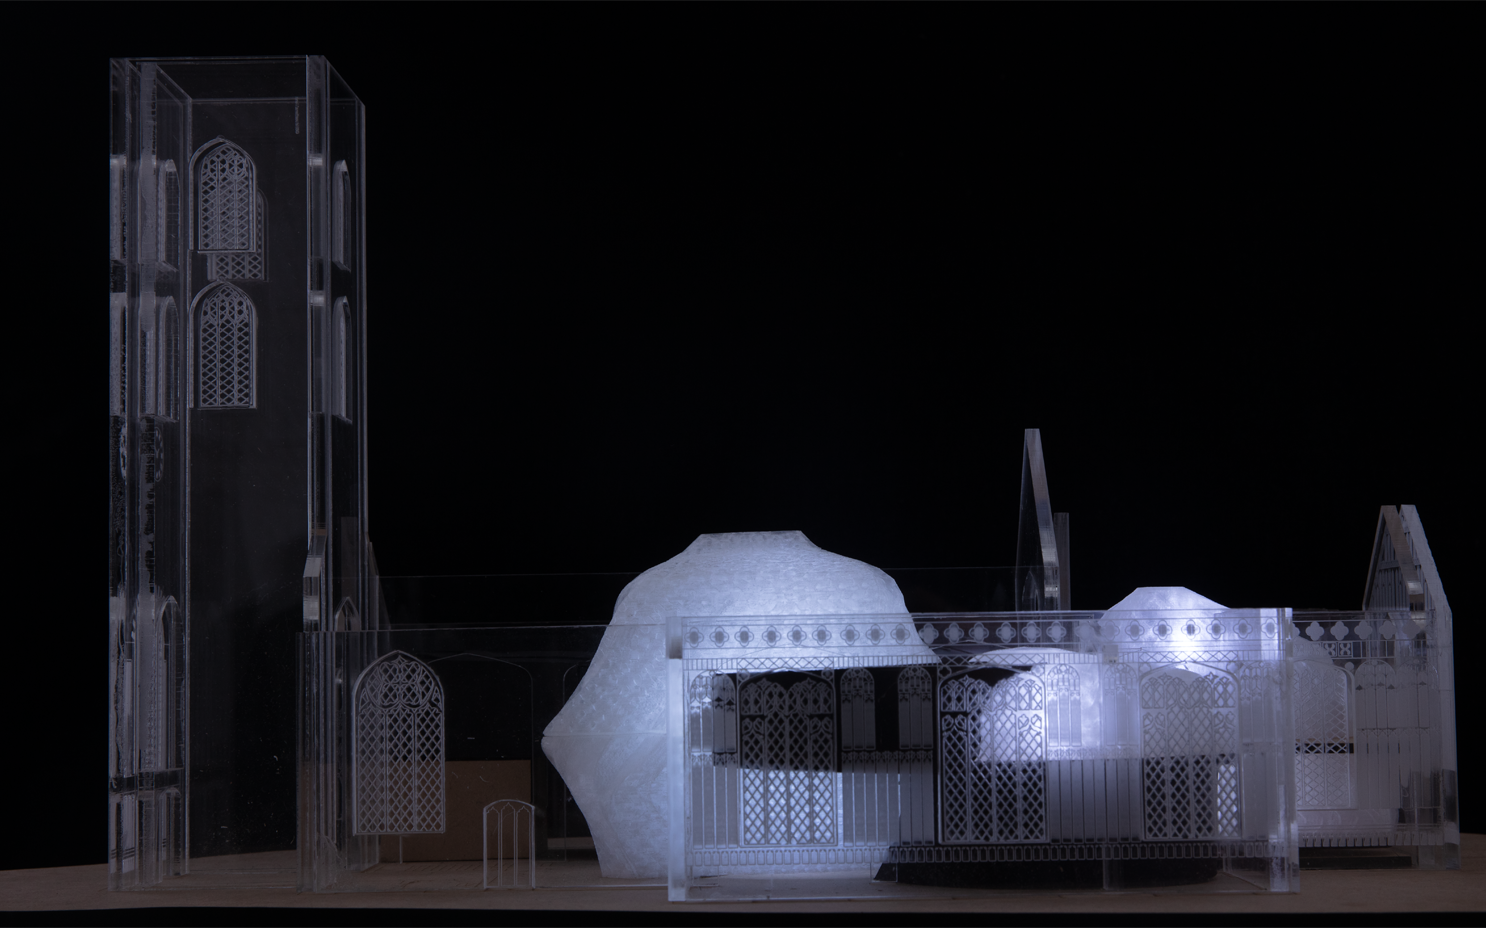 The 3D model made by Georgia Keeble shows St Michael Coslany church made of acrylic. It contains 3D printed translucent pods which contain white LED lights which glow.